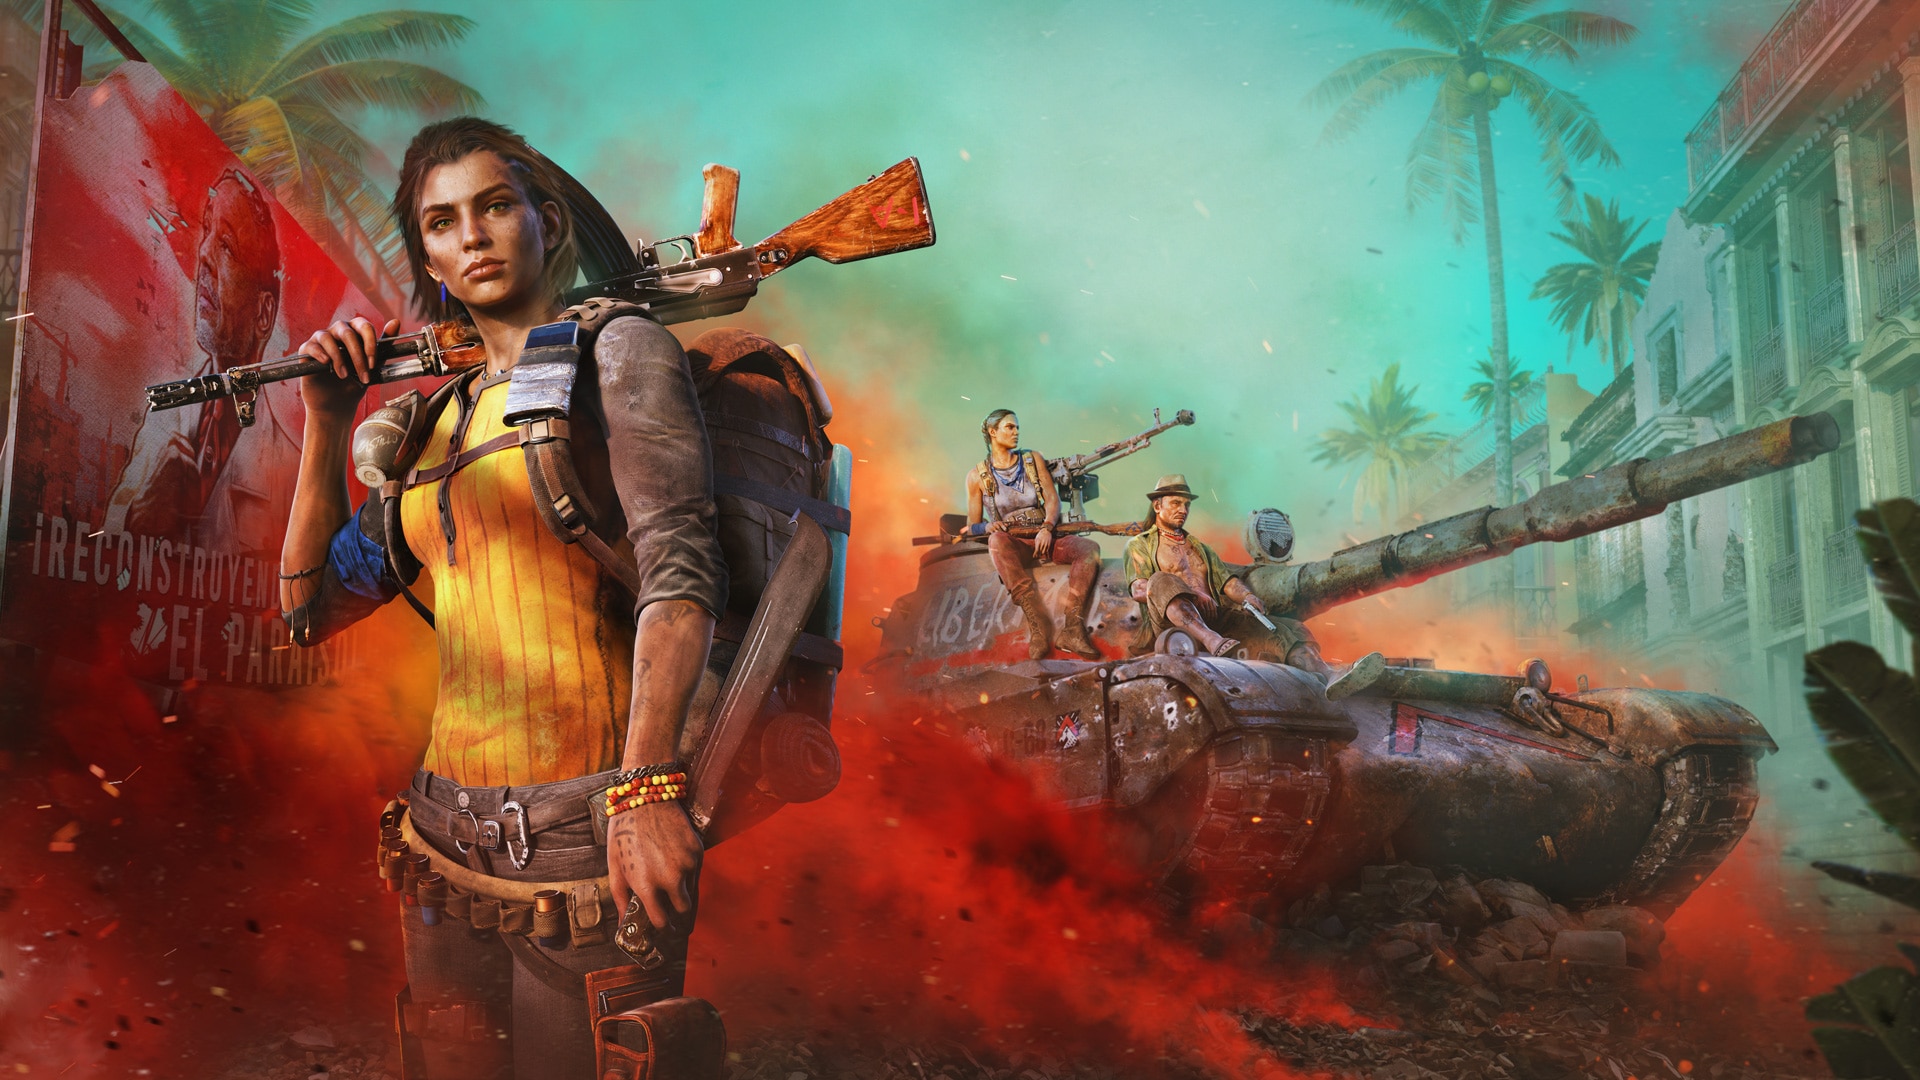 Far Cry 6 needs to rediscover its survival game roots